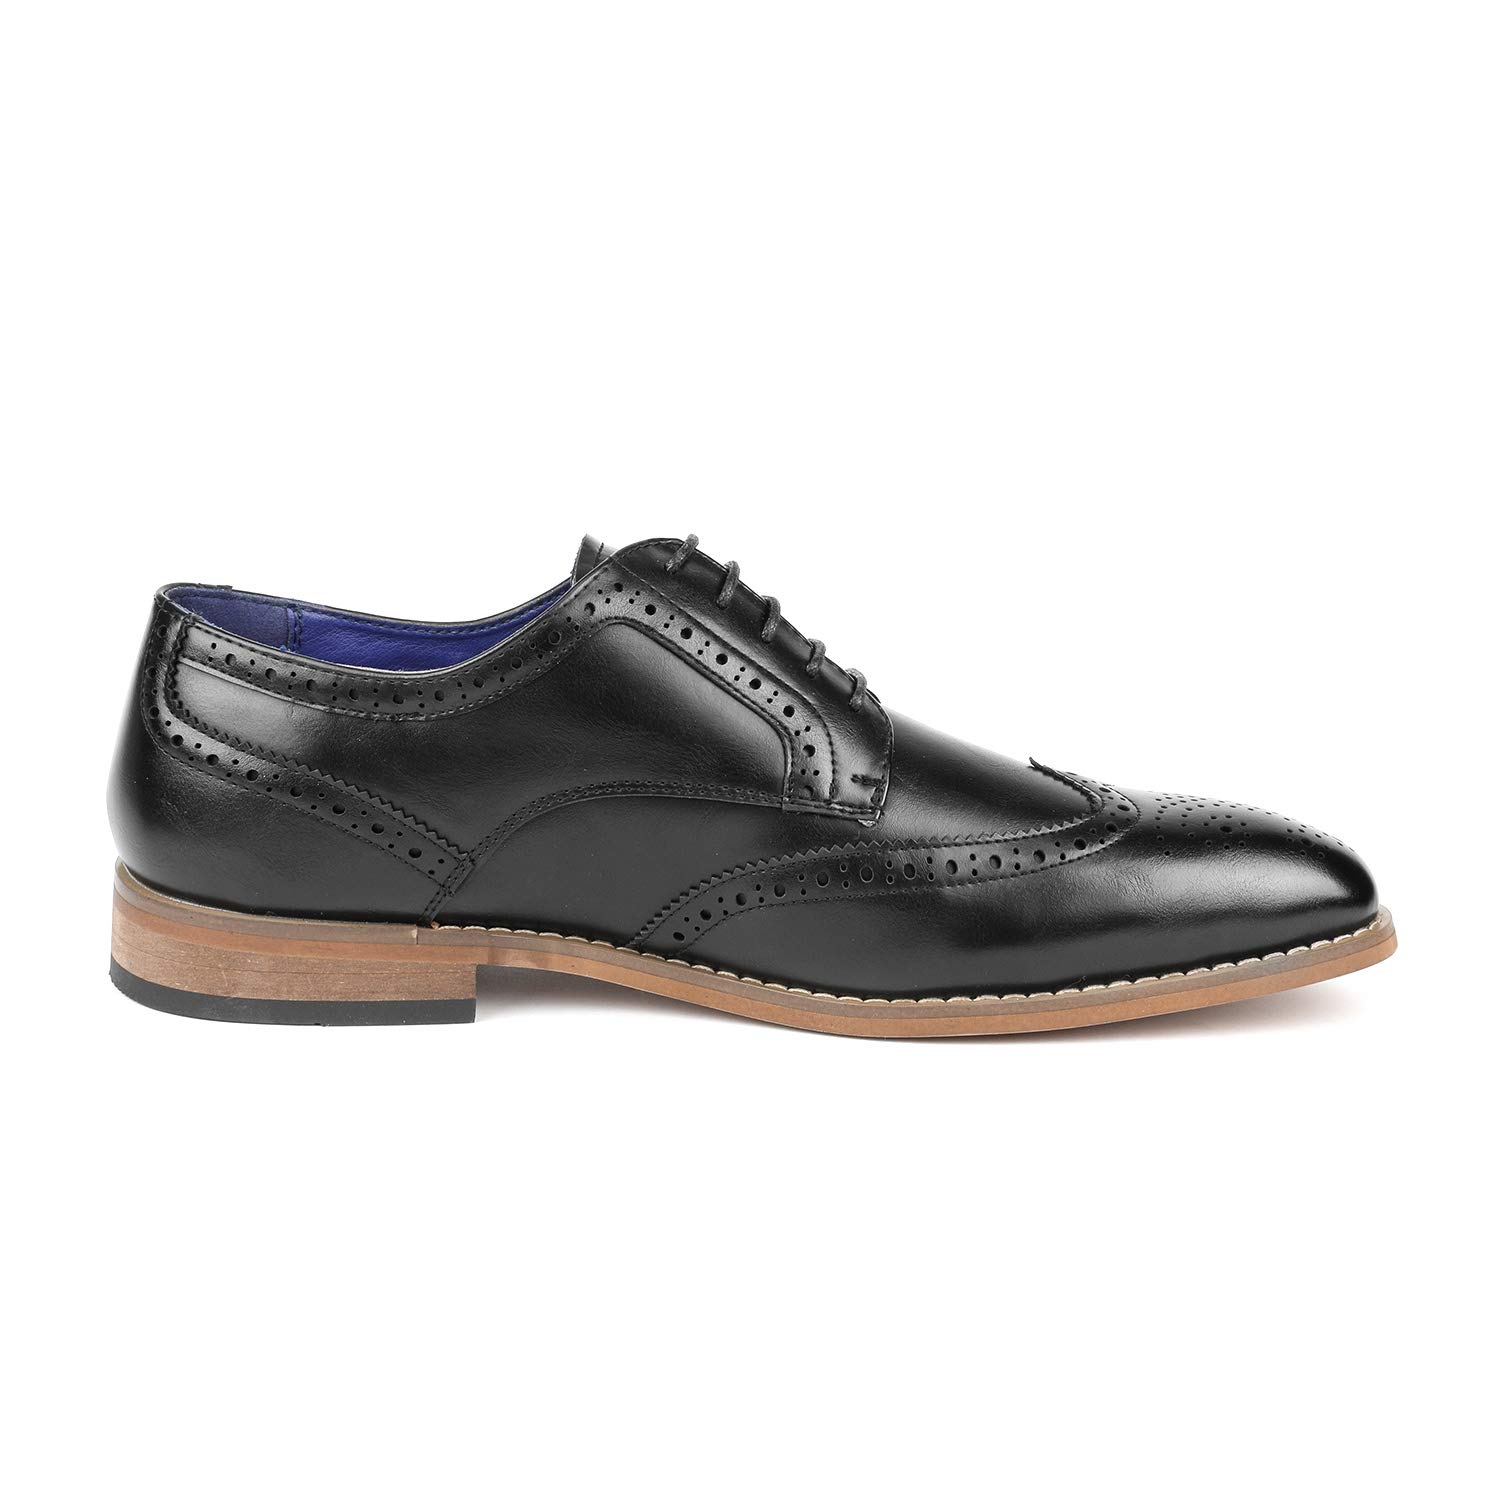 Bruno Marc Mens Brogue Oxford Shoes Lace up Wing Tip Dress Shoes Casual Shoes WILLIAM_2 BLACK Size 6.5 - image 2 of 5